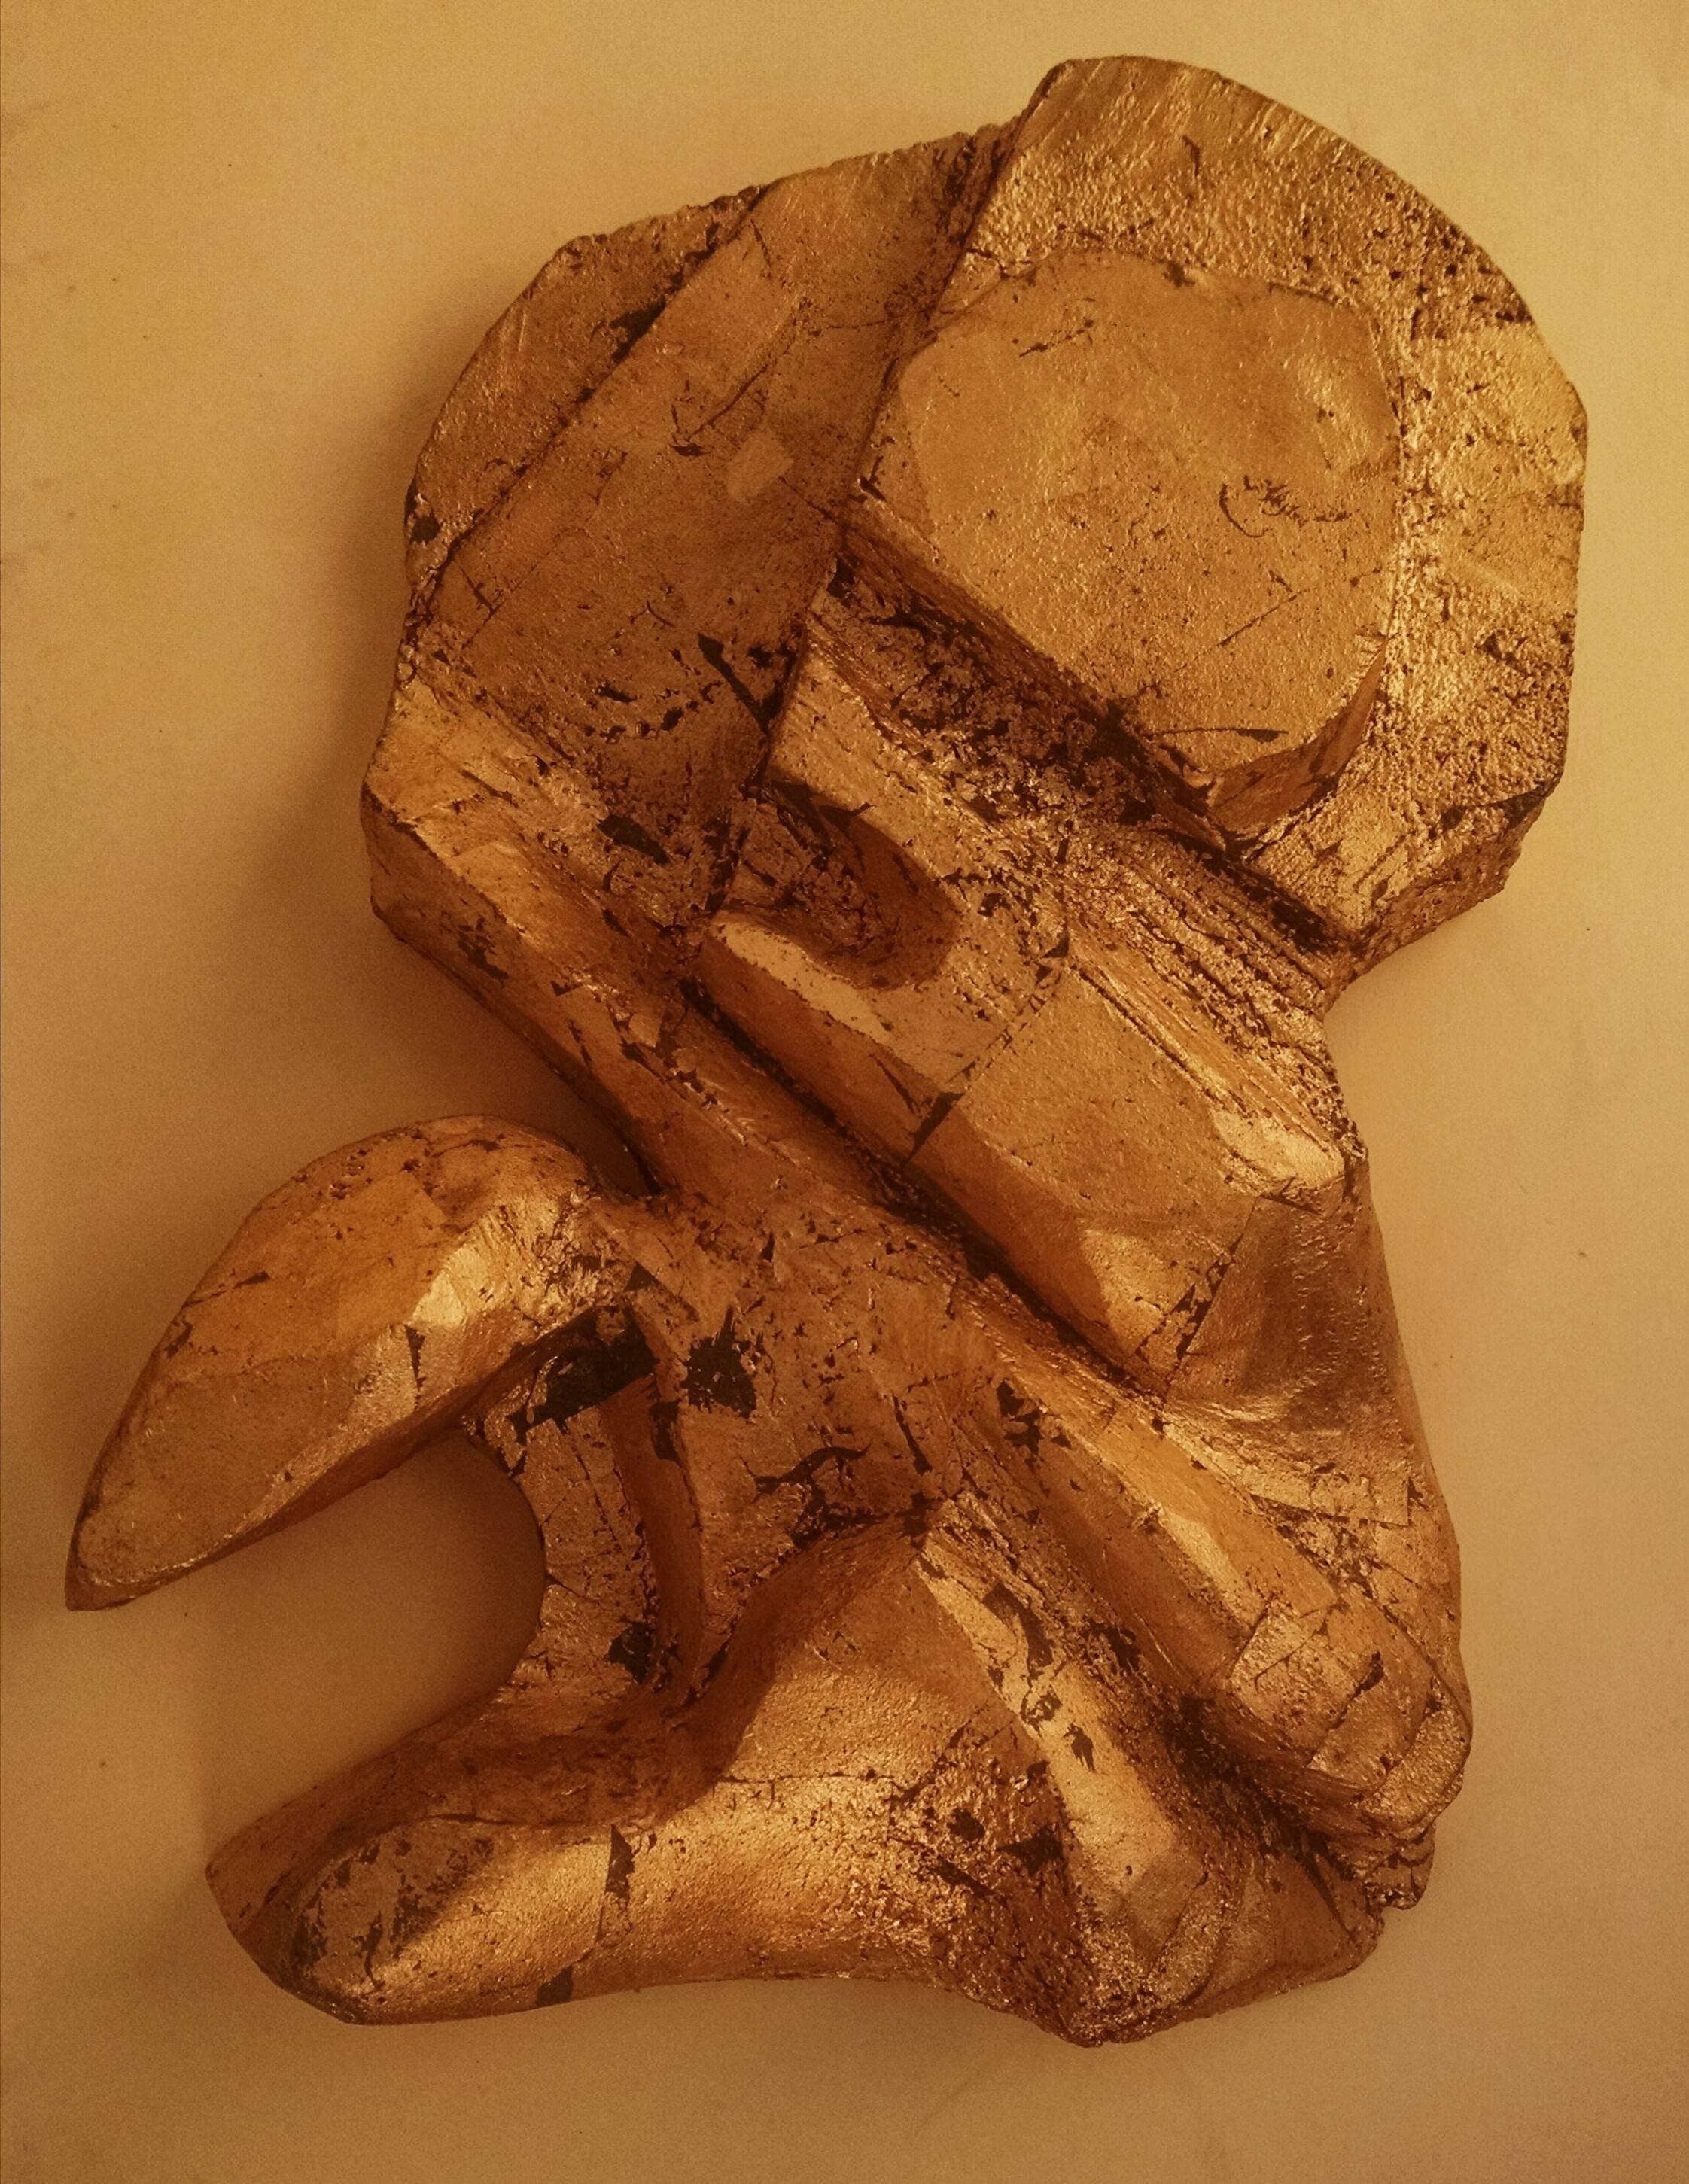 This is a gold finished steel or iron sculpture in an amorphous shape, quite heavy. kind of reminds me of the sculpture of Han Jean Arp. This came from an estate and bears his intitials welded to the verso. there is no accompanying documentation. it